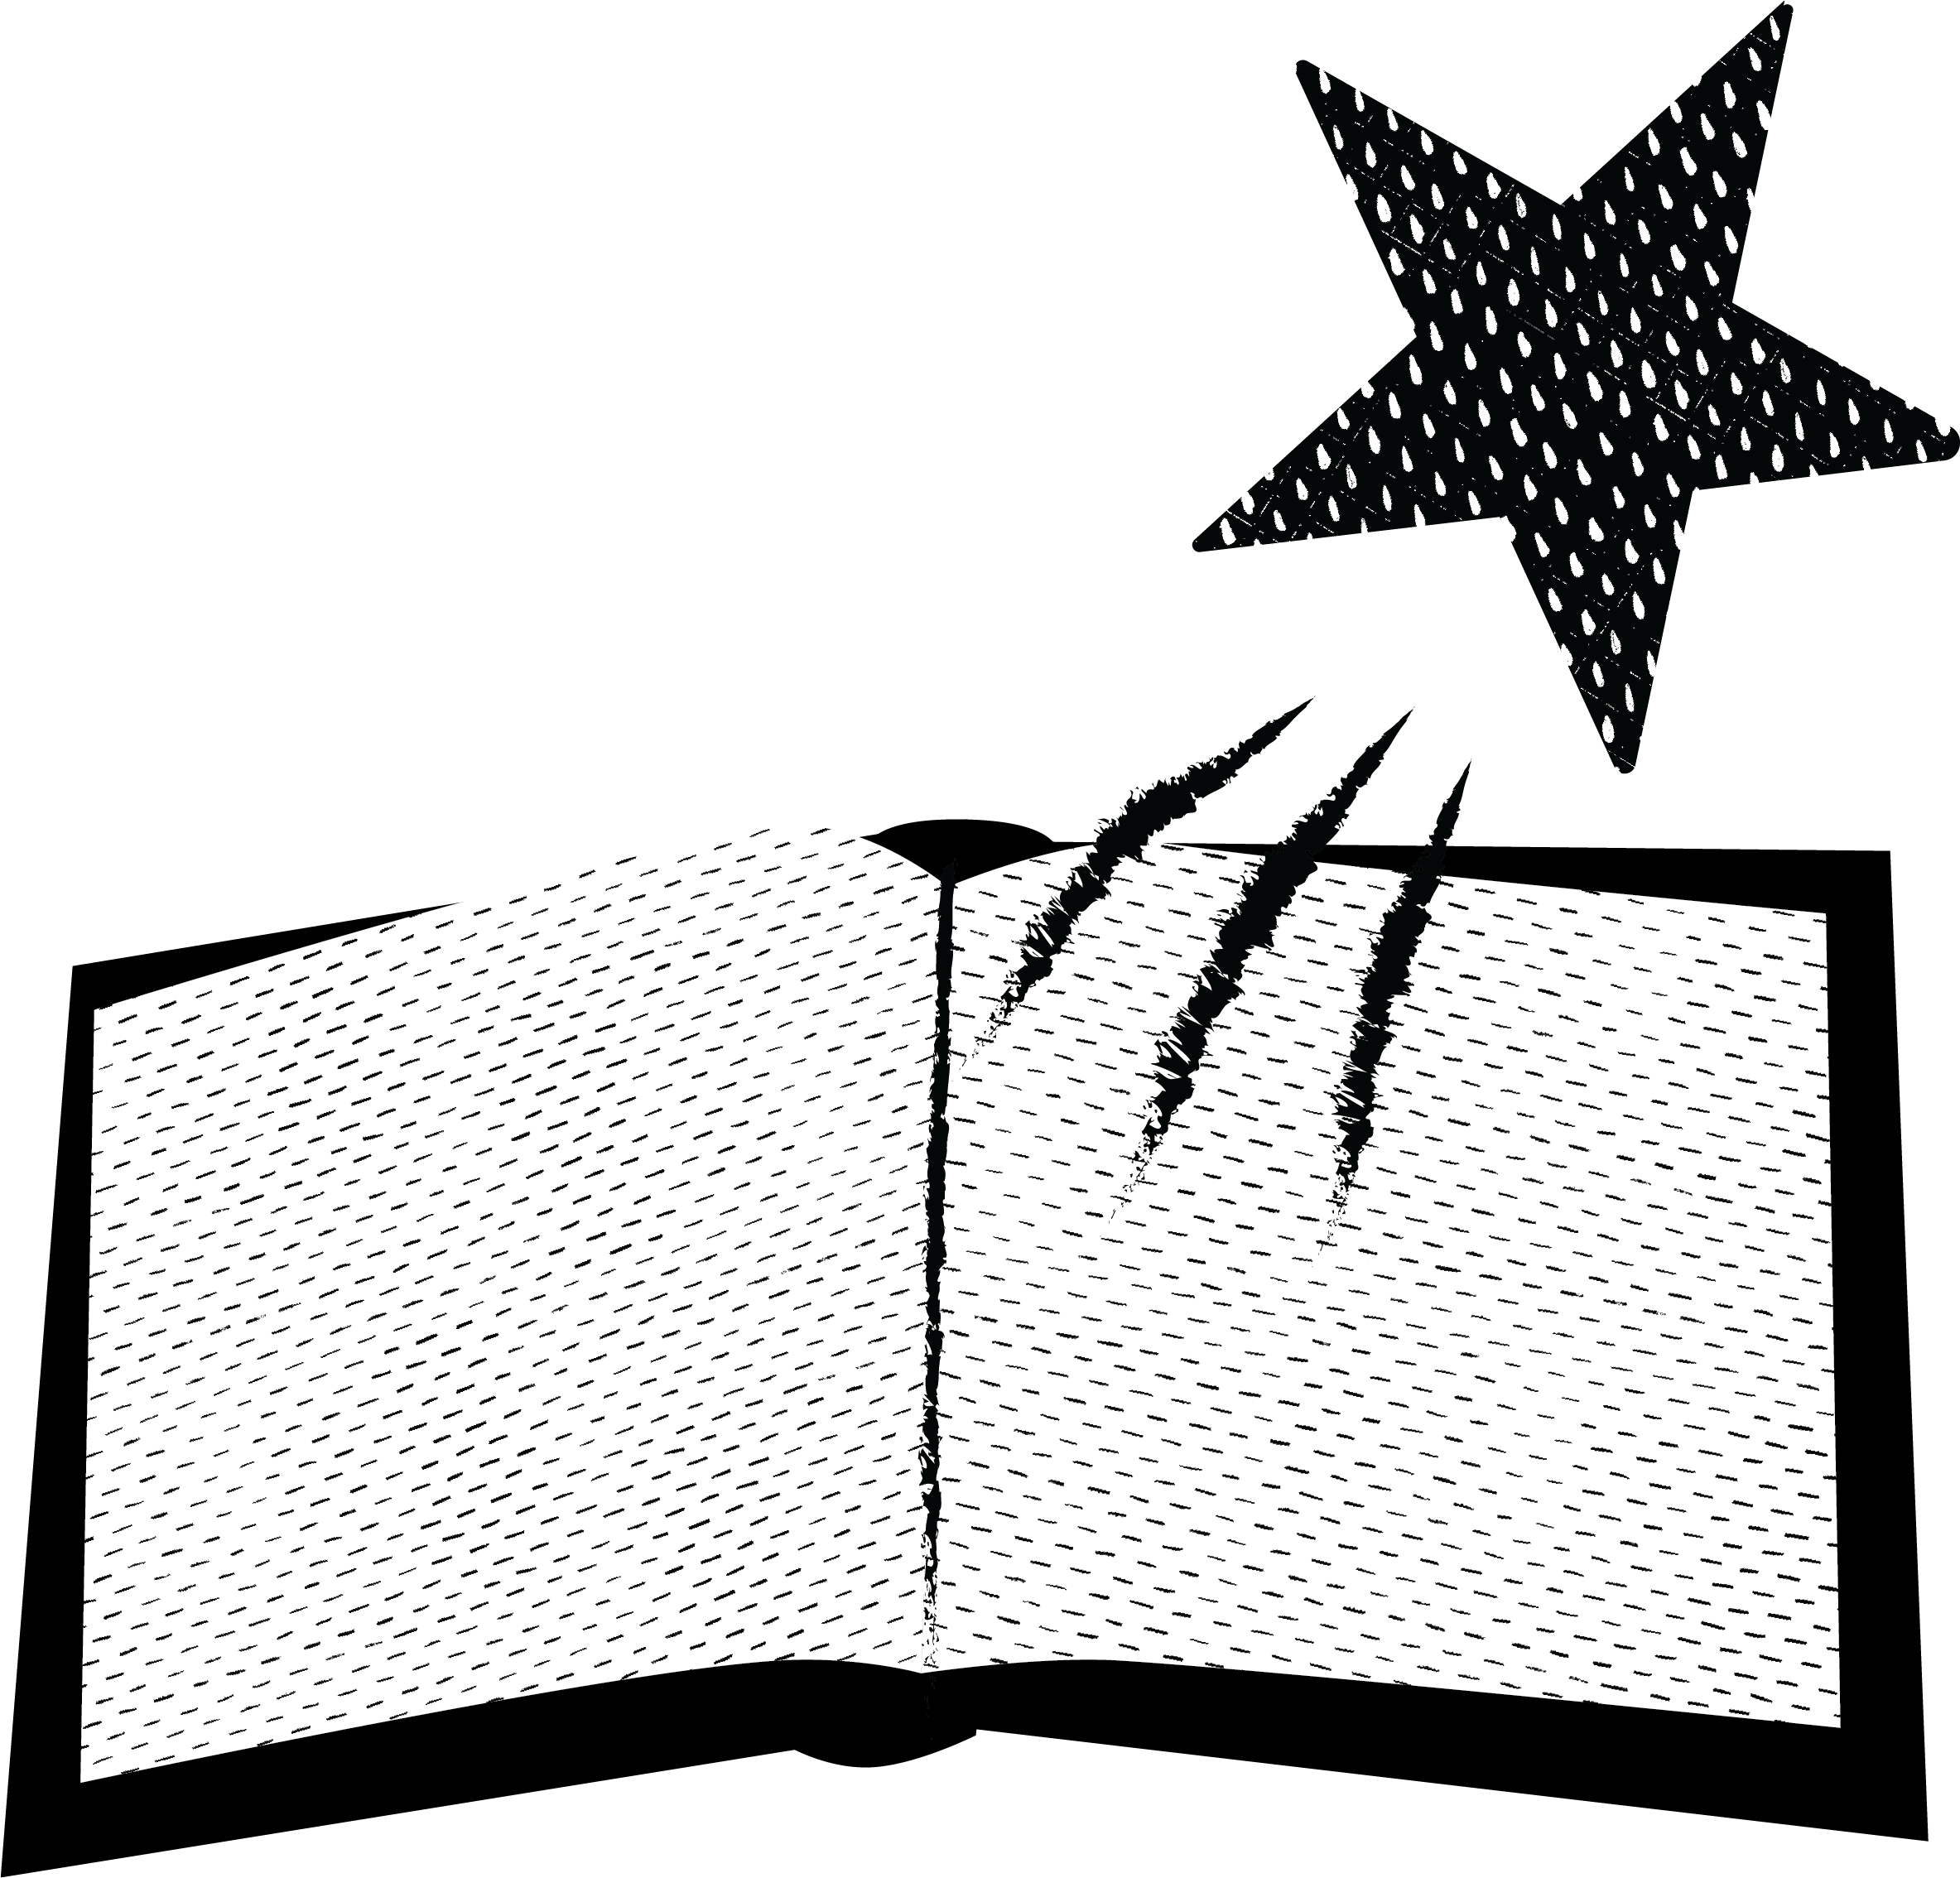 shooting star coming out of an open book